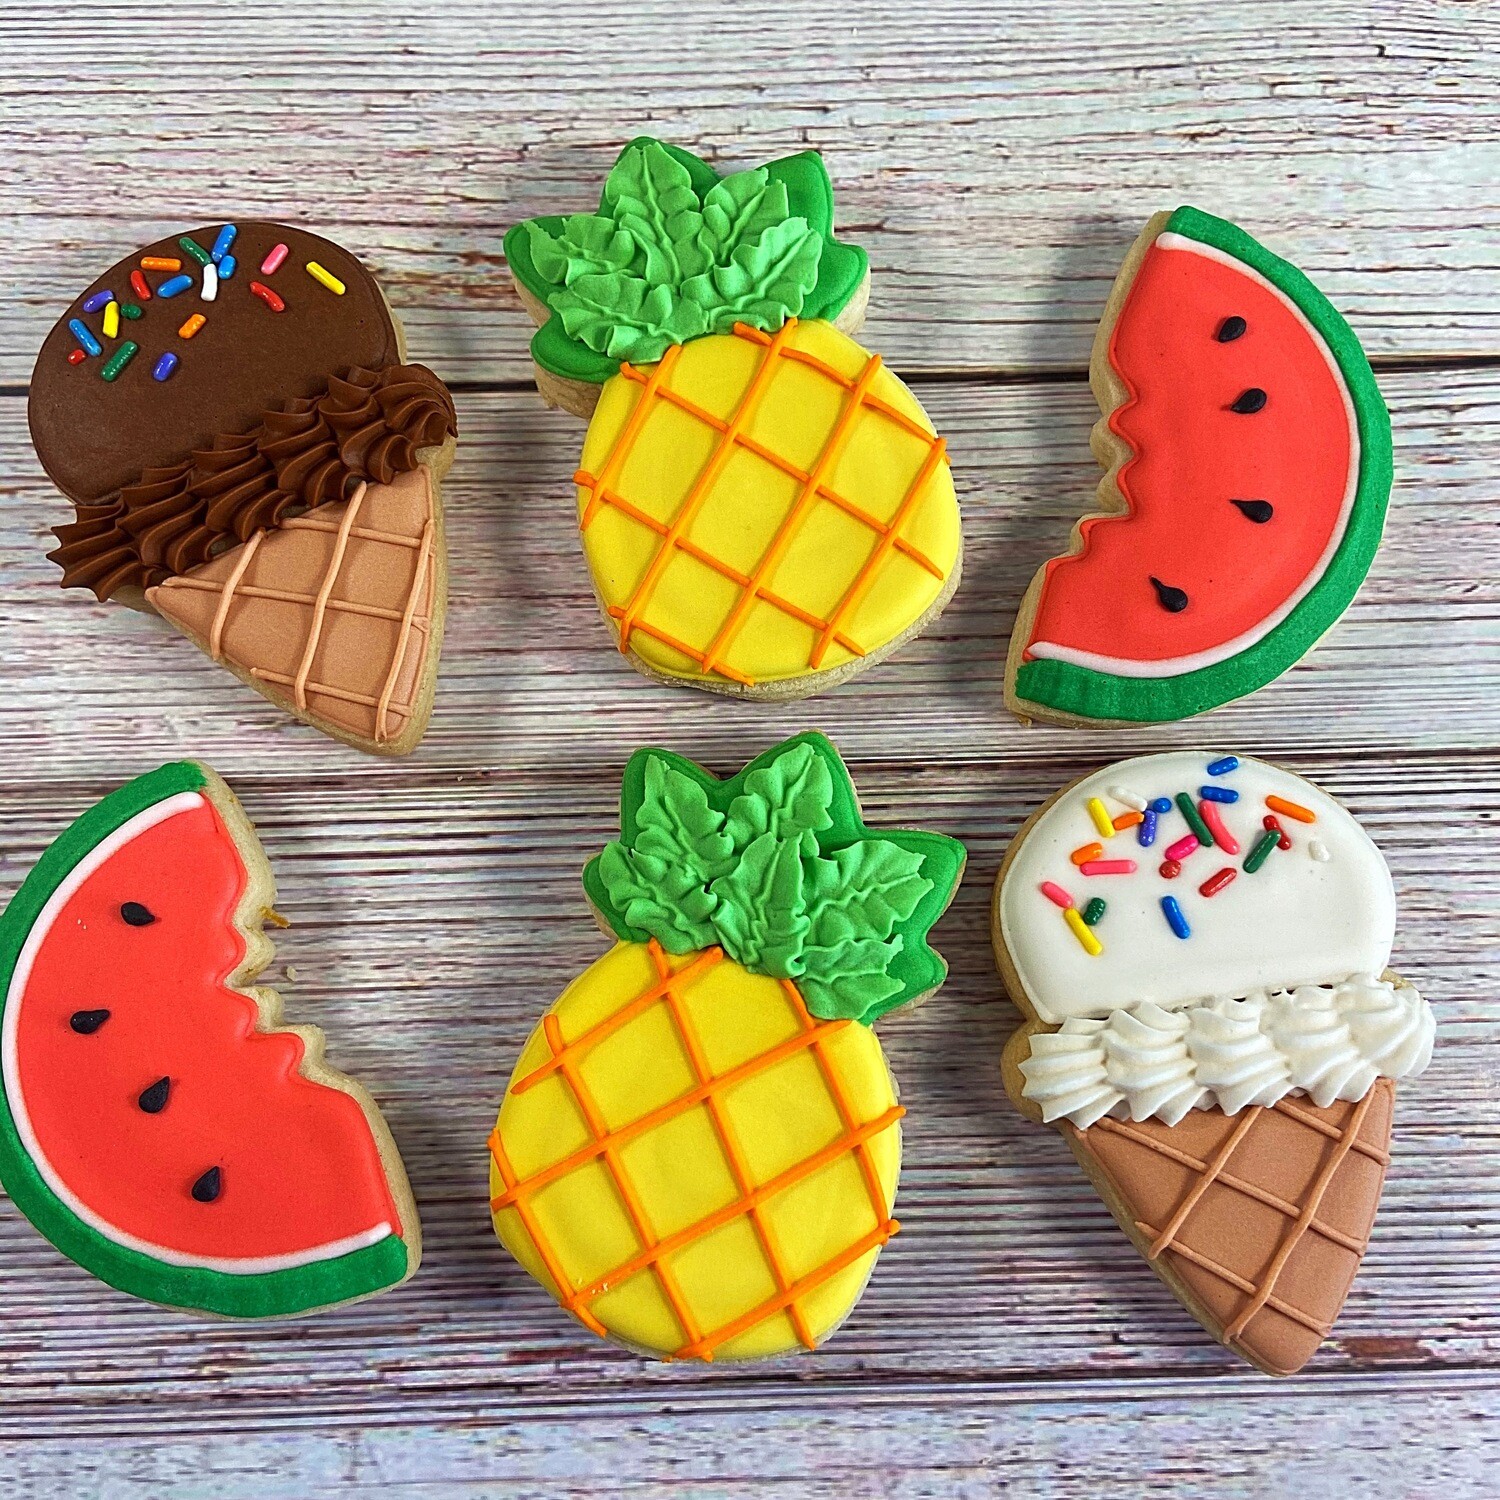 'Sweet Treats Decorating Workshop - TUESDAY, JULY 7th at 2 p.m. (THE COOKIE DECORATING STUDIO)